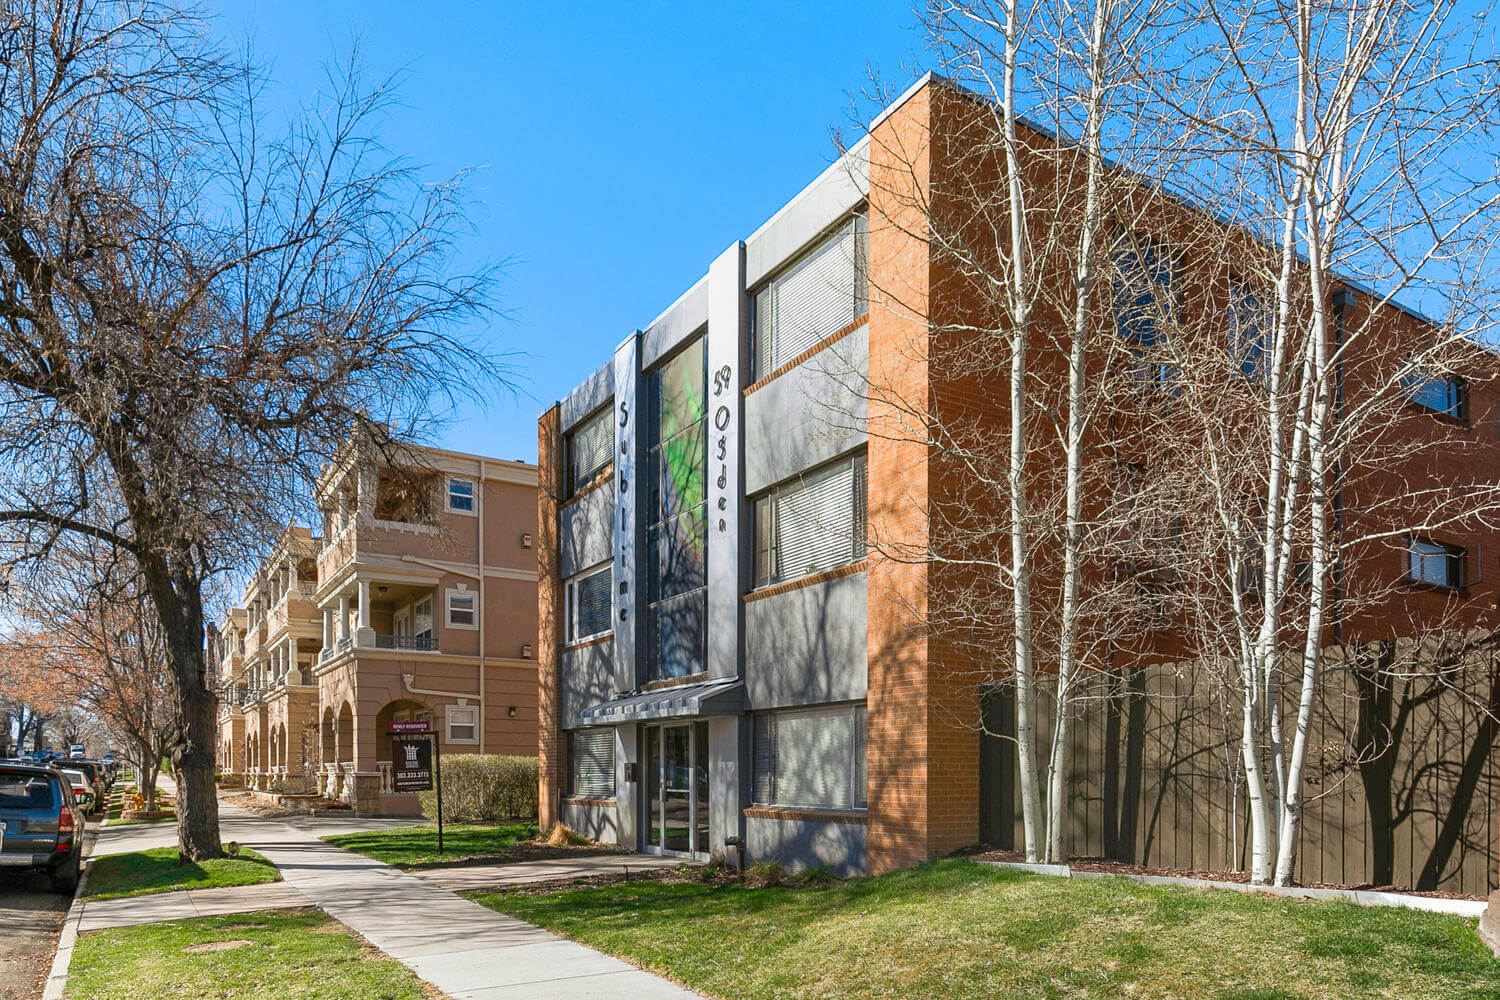 Just Sold: 22 Units in West Wash Park